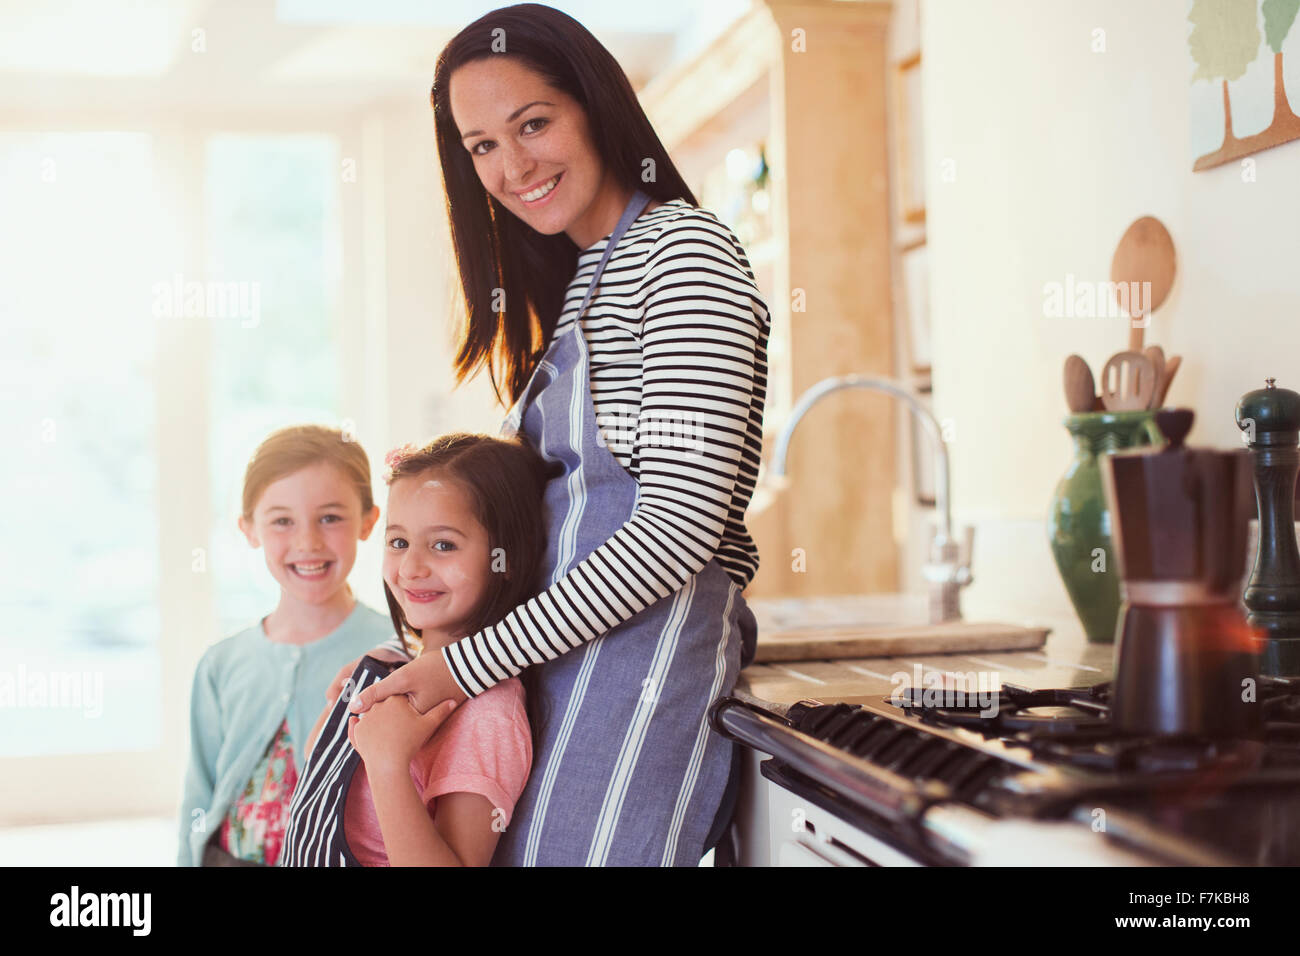 Portrait smiling mother and daughters in kitchen Stock Photo